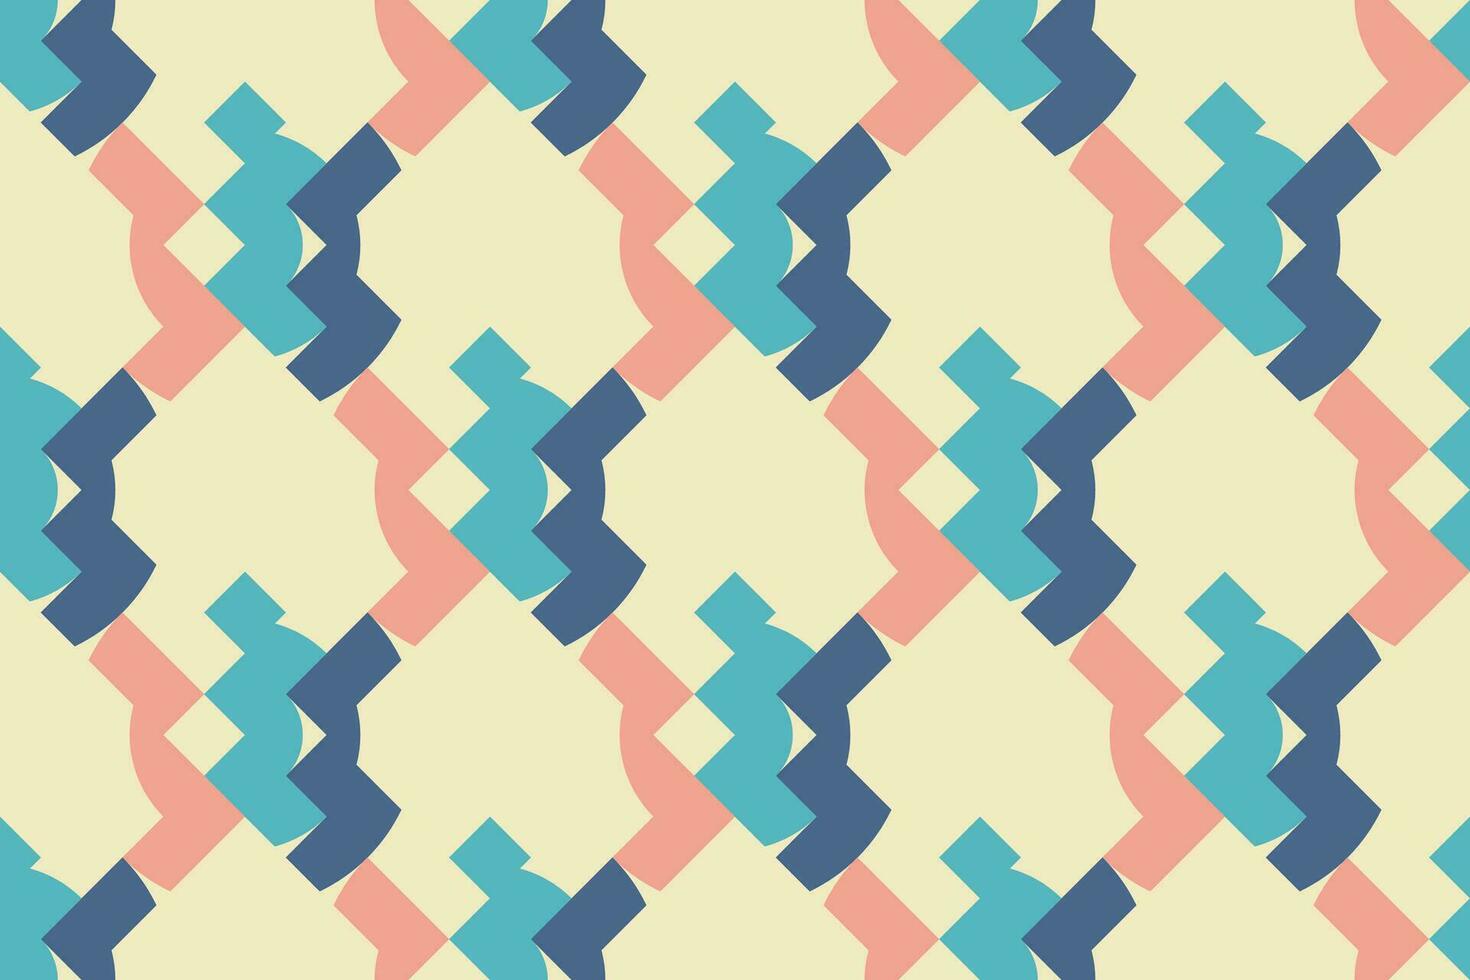 Geometric seamless smooth color pattern. Simple vector graphic background.